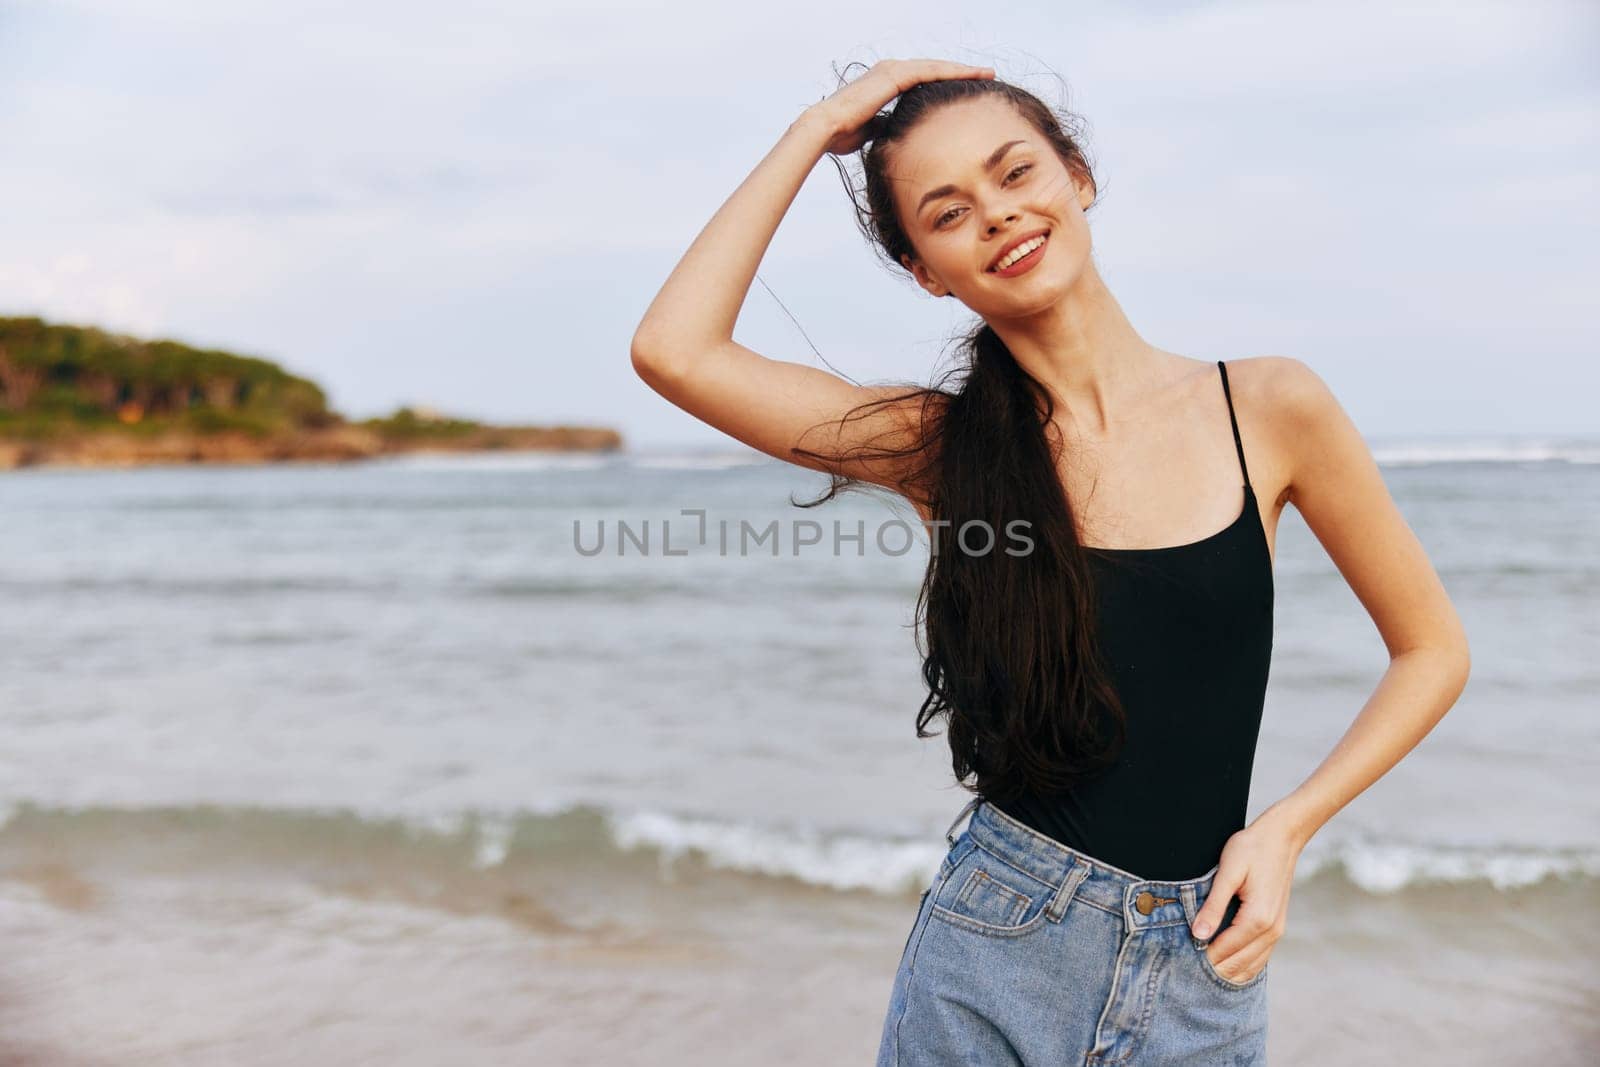 sea woman summer smile free coast lifestyle holiday relax sunlight ocean beach carefree freedom peaceful travel vacation caucasian sand young sunset